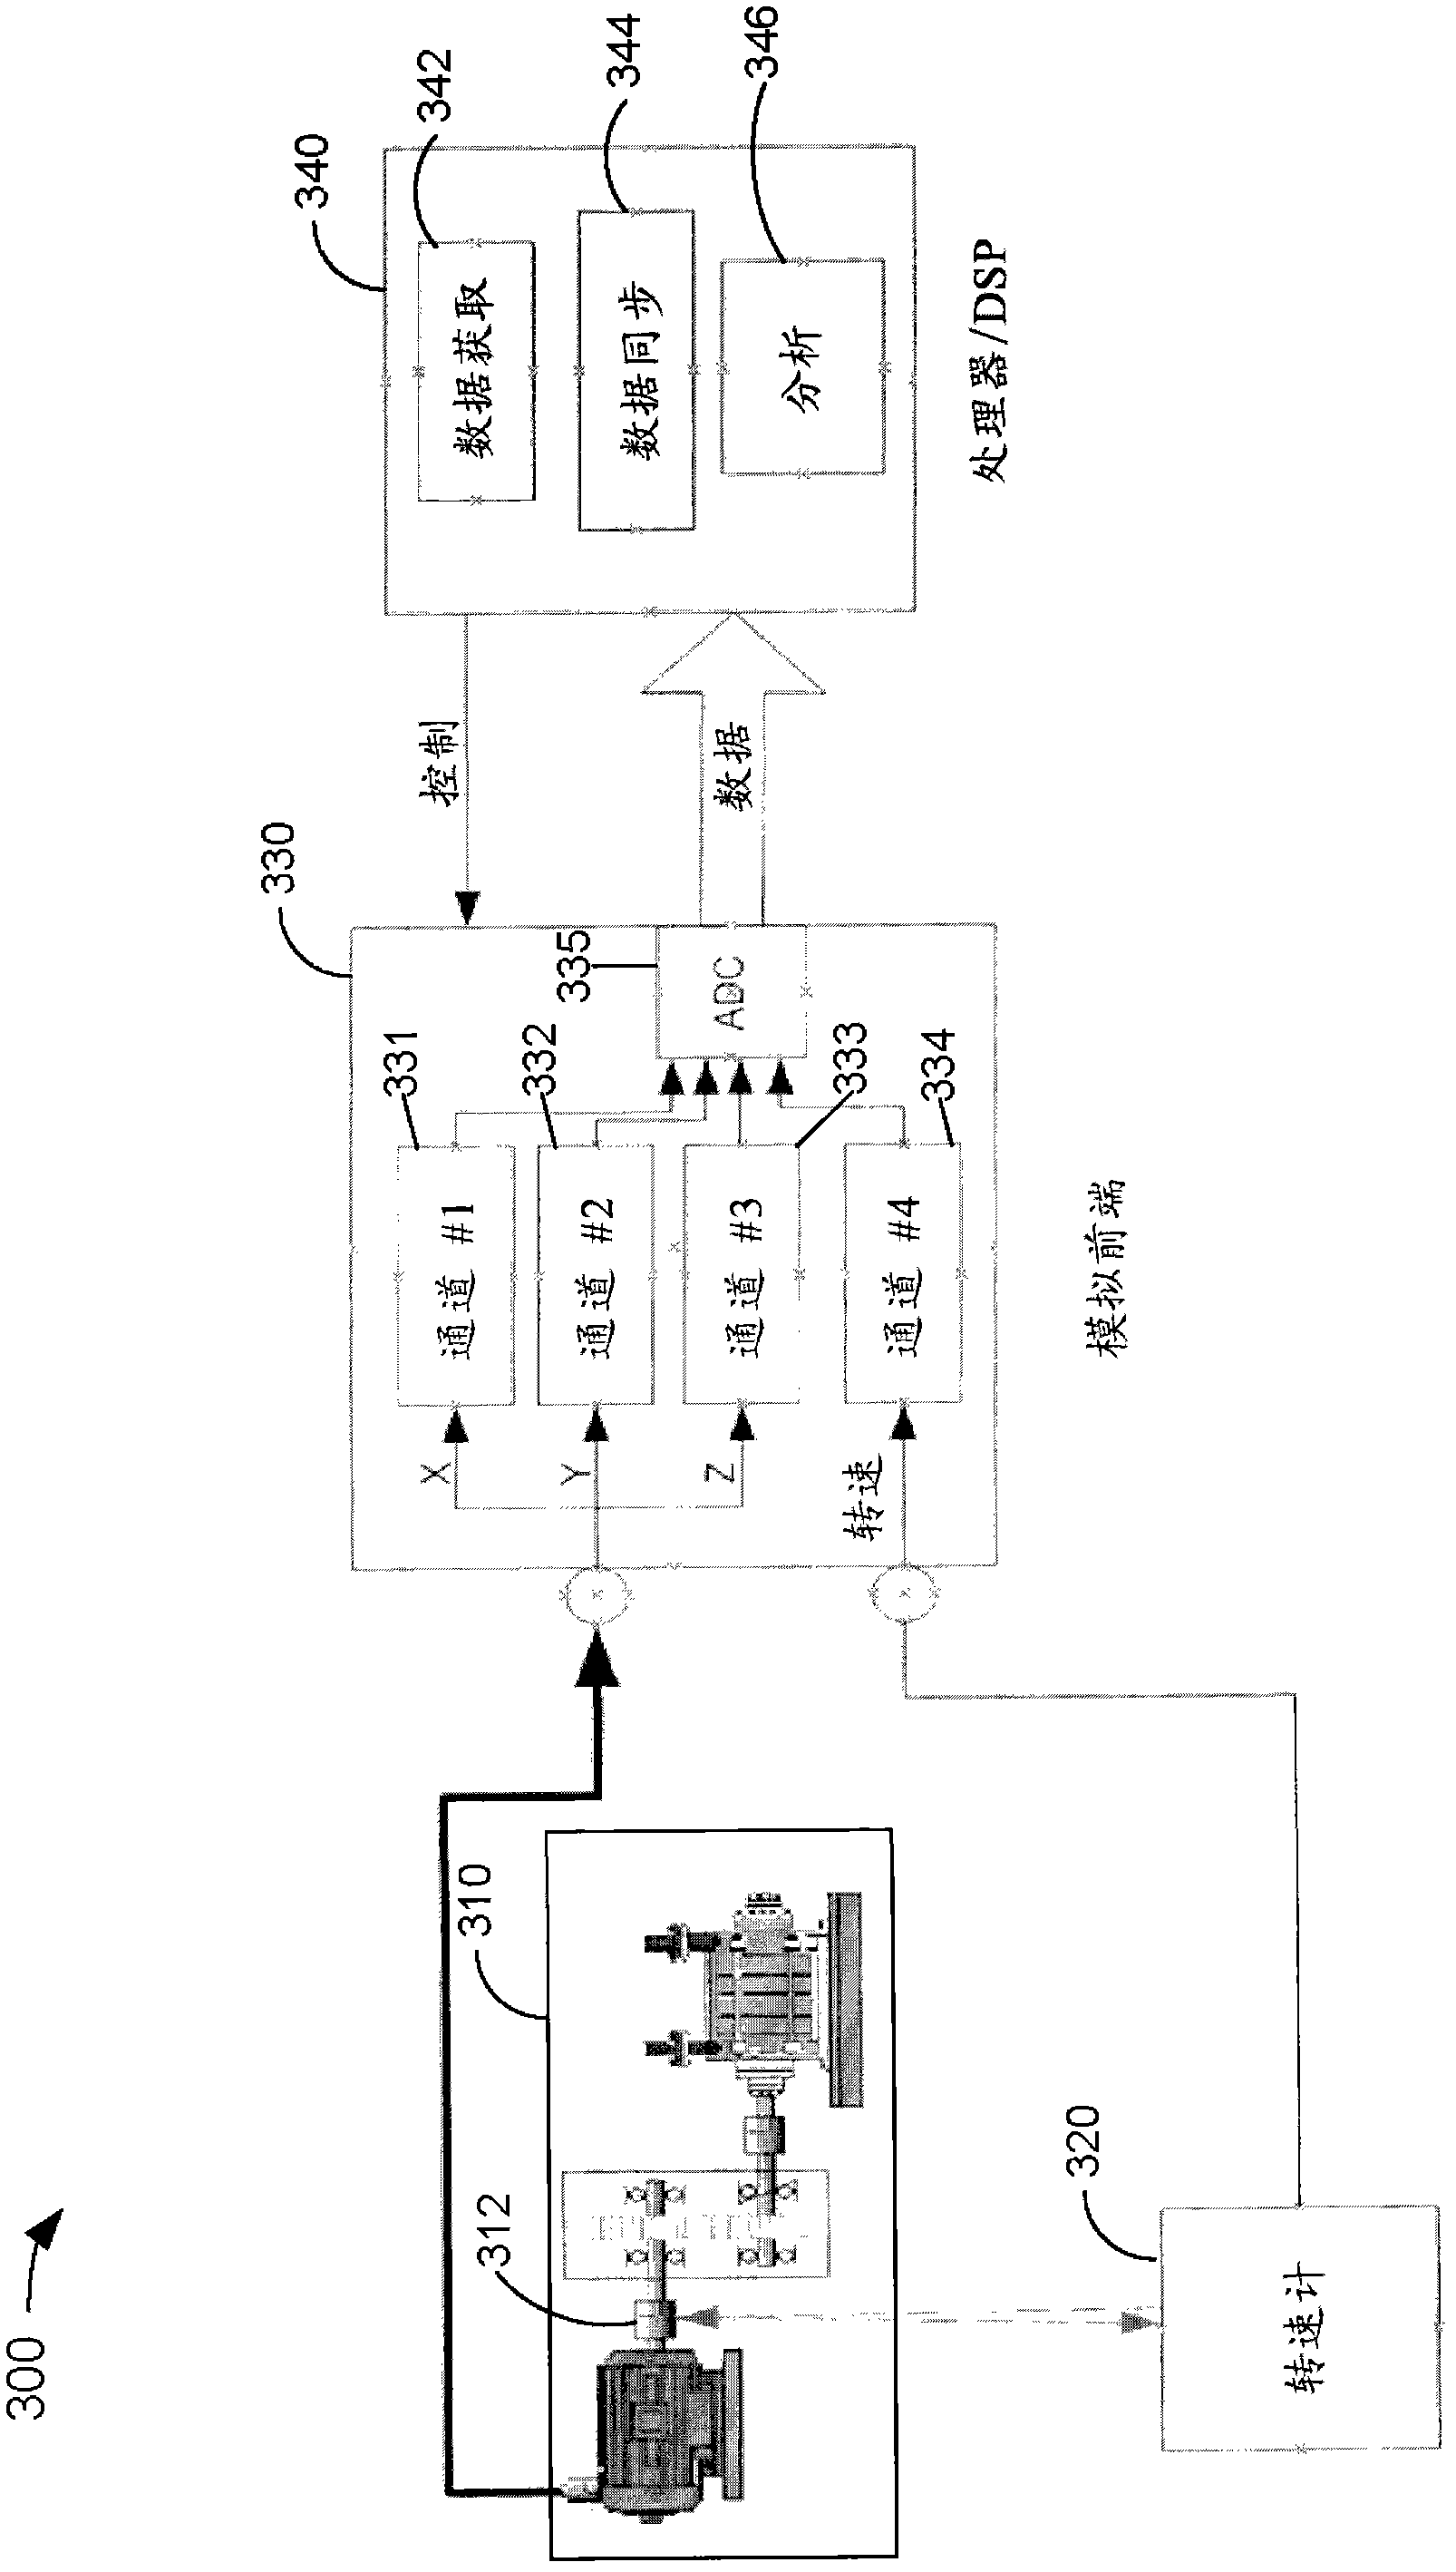 System and method for vibration analysis and phase analysis of vibration waveforms using dynamic statistical averaging of tachometer data to accurately calculate rotational speed